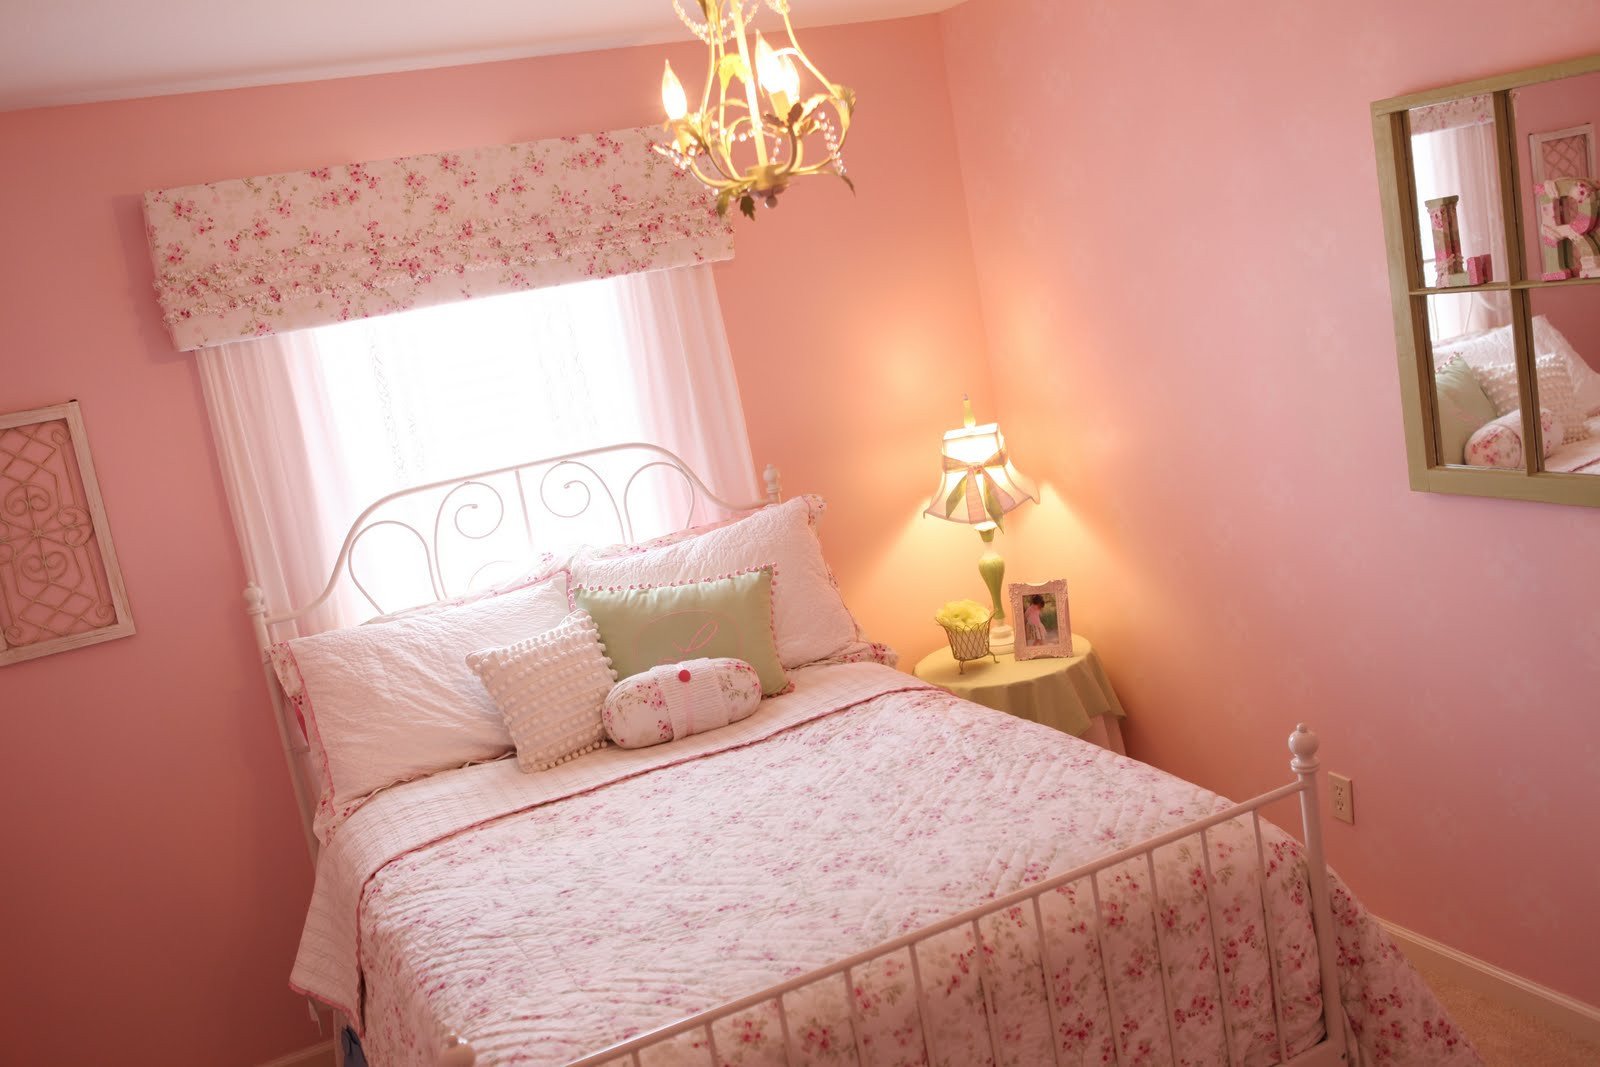 Girl Bedroom Painting Ideas
 Girls Room Paint Ideas with Feminine Touch Amaza Design